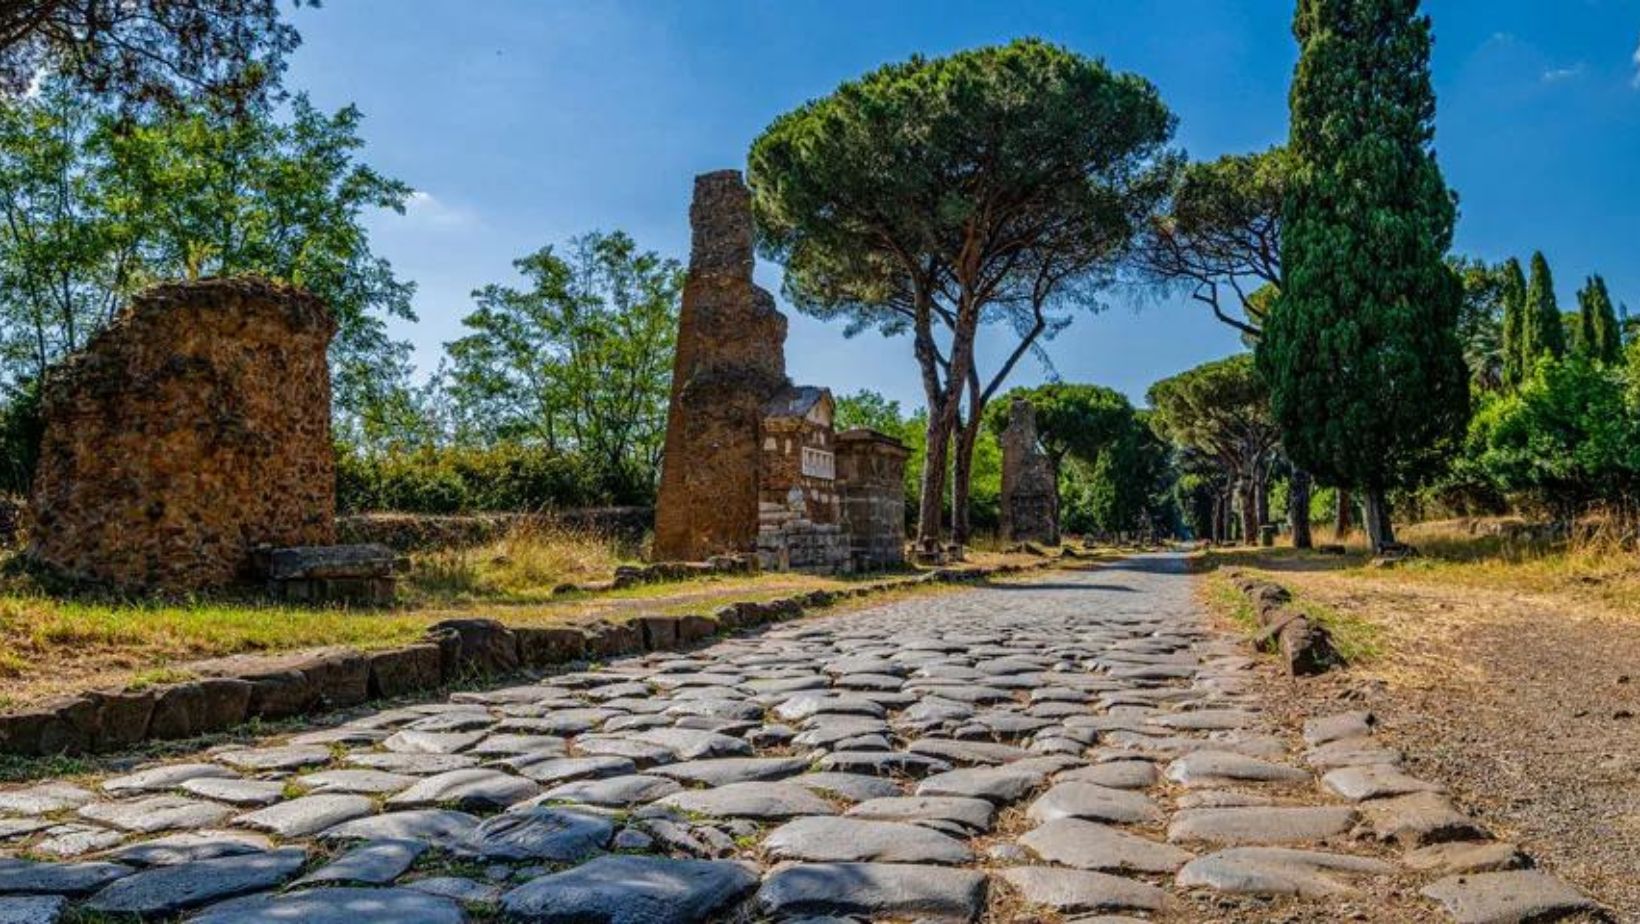 Why did Romans Build the Appian Way